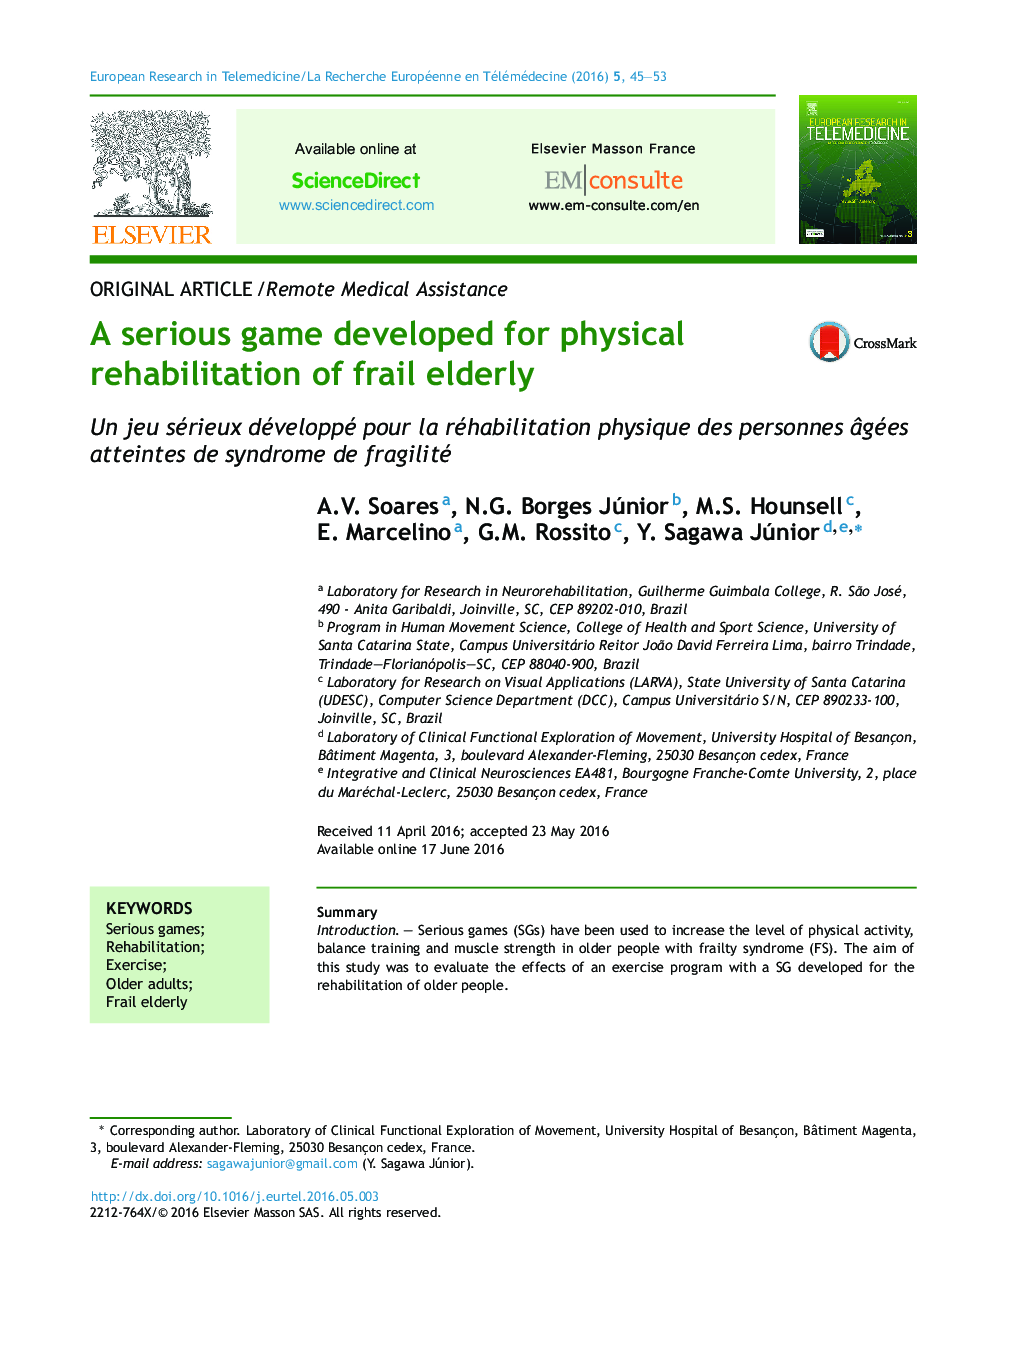 A serious game developed for physical rehabilitation of frail elderly